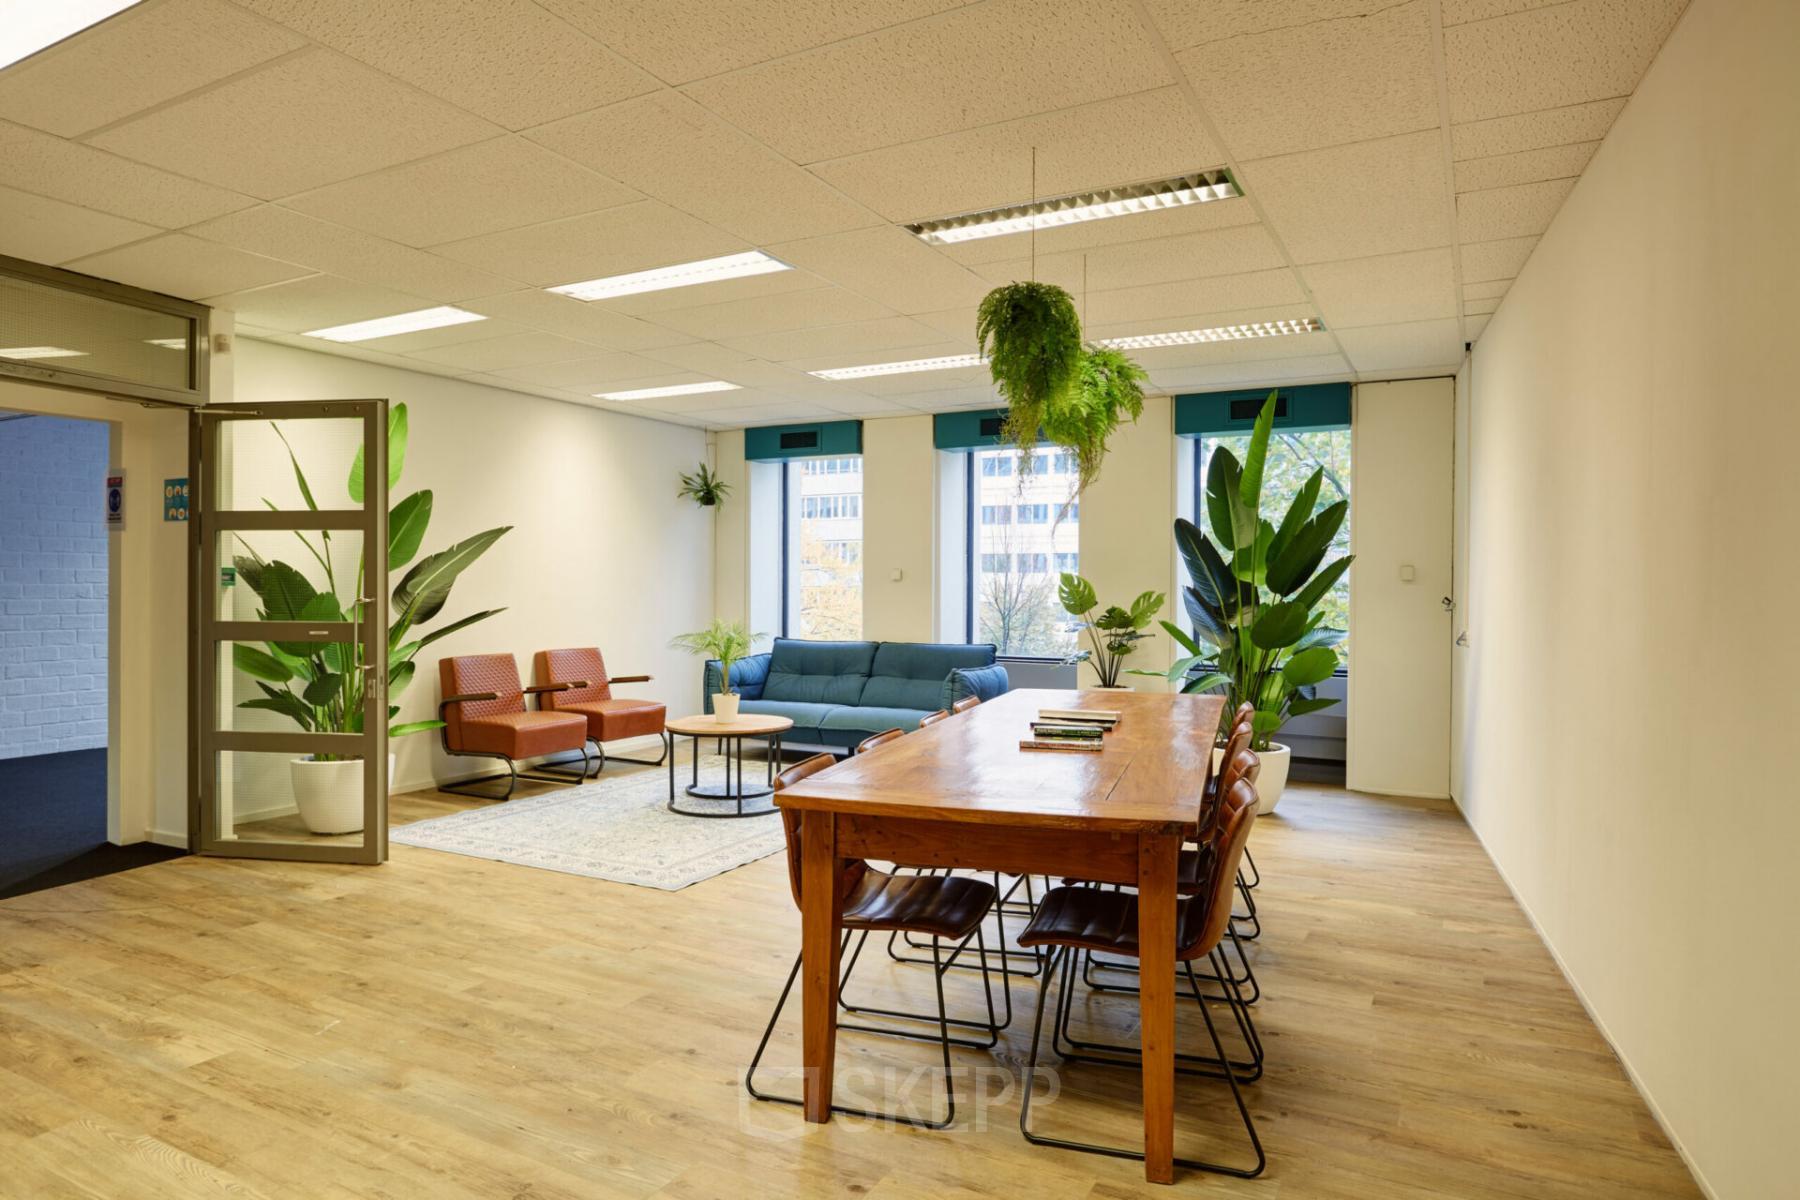 Modern office space rental at Westblaak 92, in Rotterdam Center, featuring a cozy lounge area with plush seating and lush green plants.